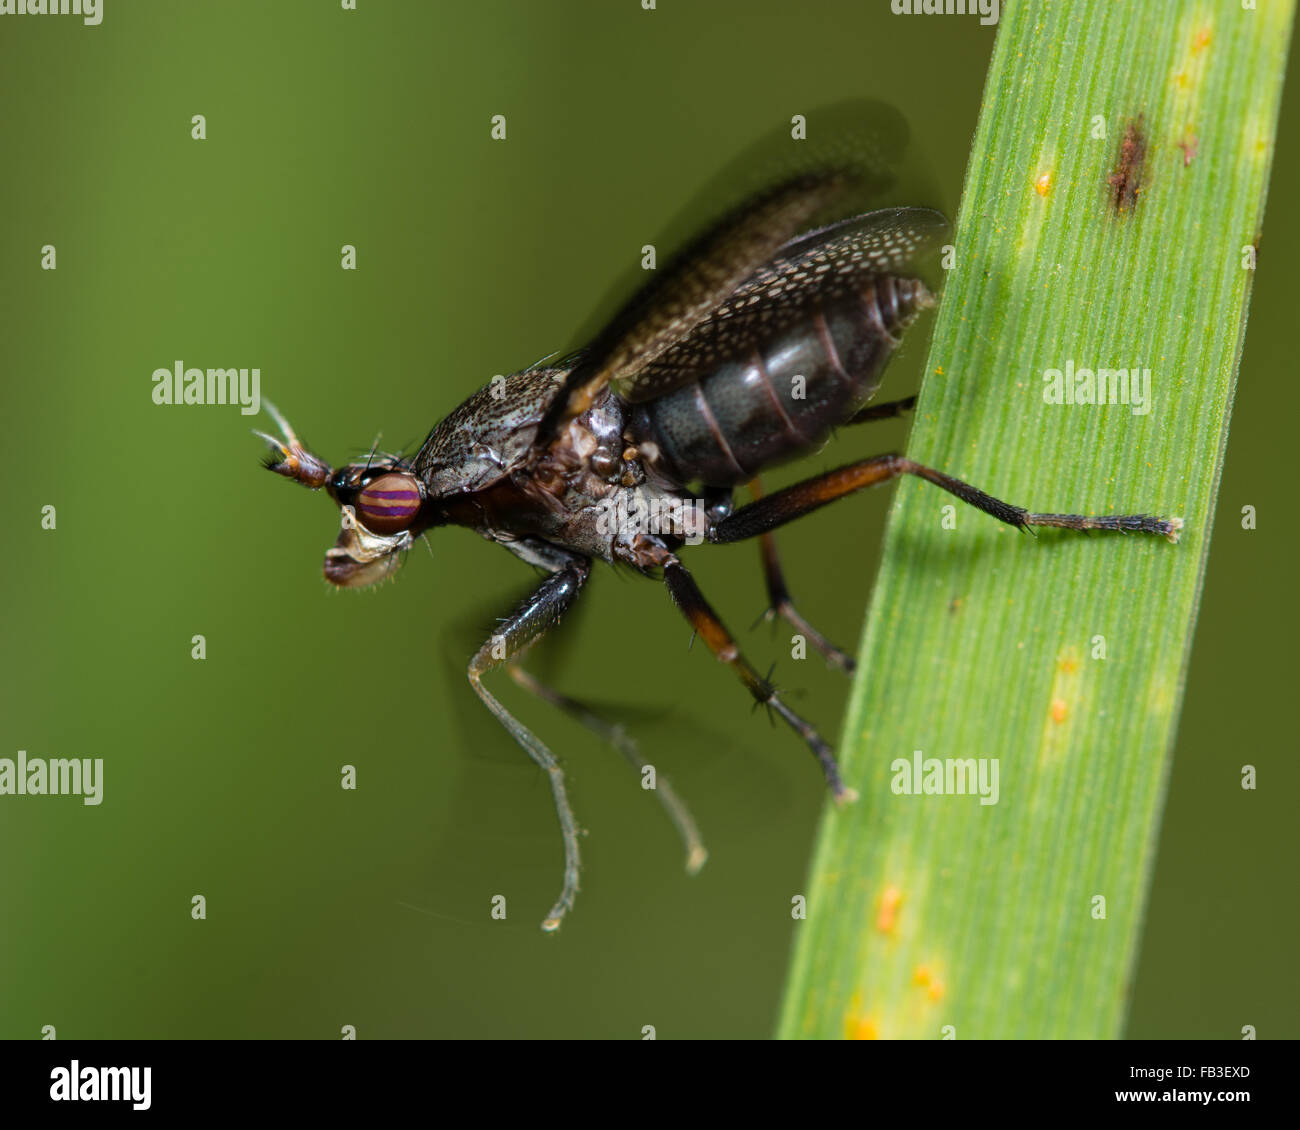 Marsh fly Coremacera marginata at moment of take off. A fly in the family Sciomyzidae with iridescent striped eyes Stock Photo